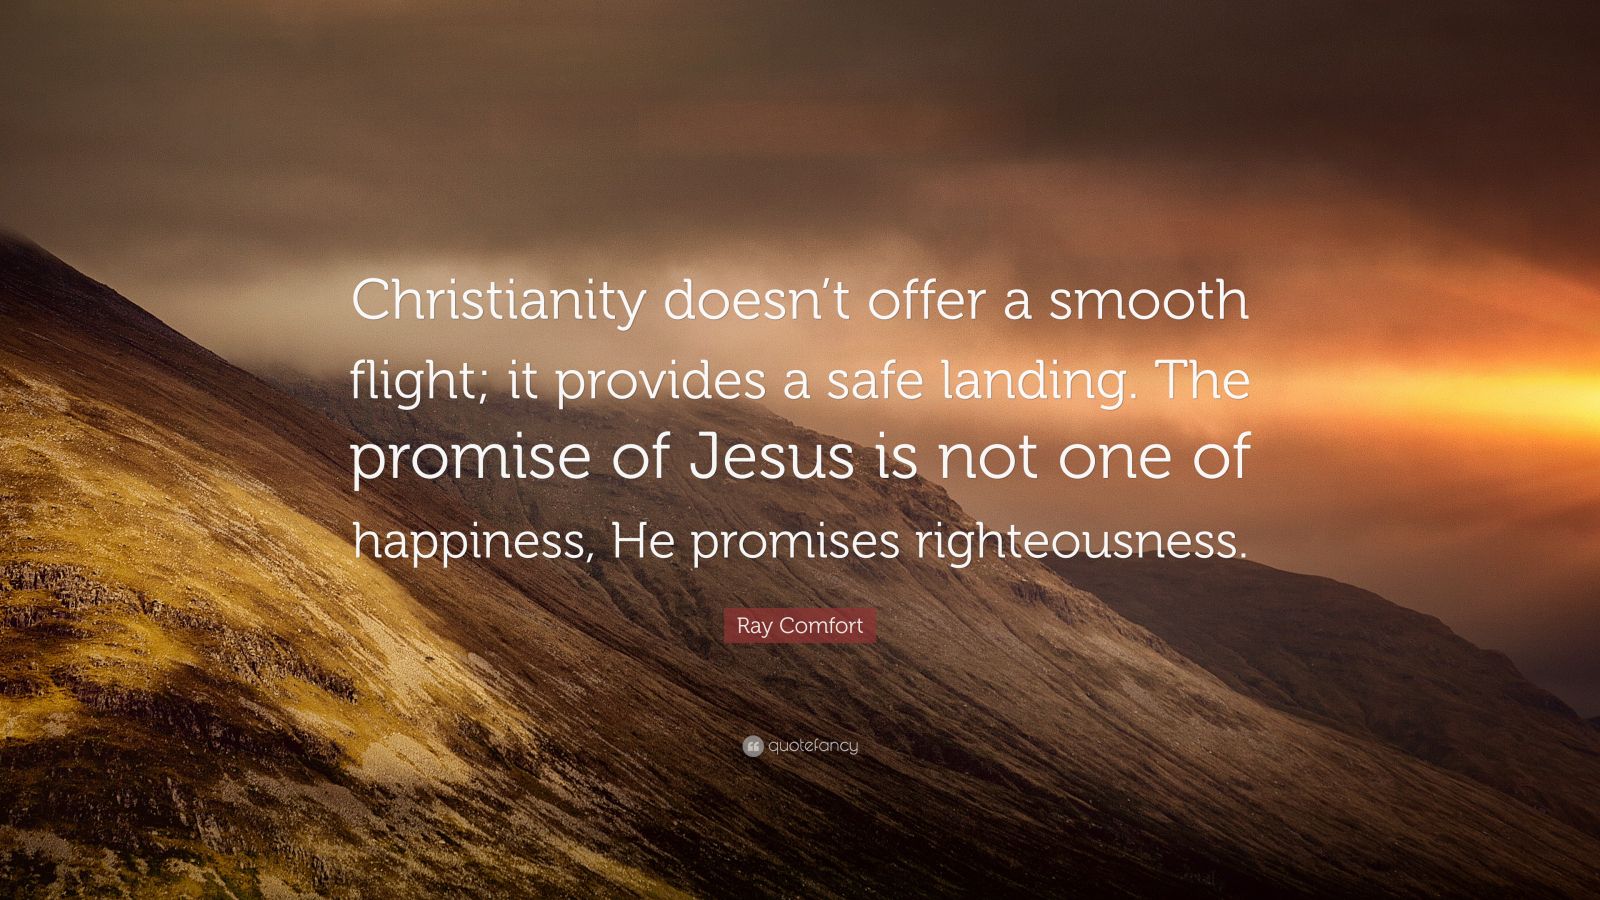 Ray Comfort Quote: “Christianity doesn't offer a smooth flight; it provides  a safe landing. The promise of Jesus is not one of happiness, He”